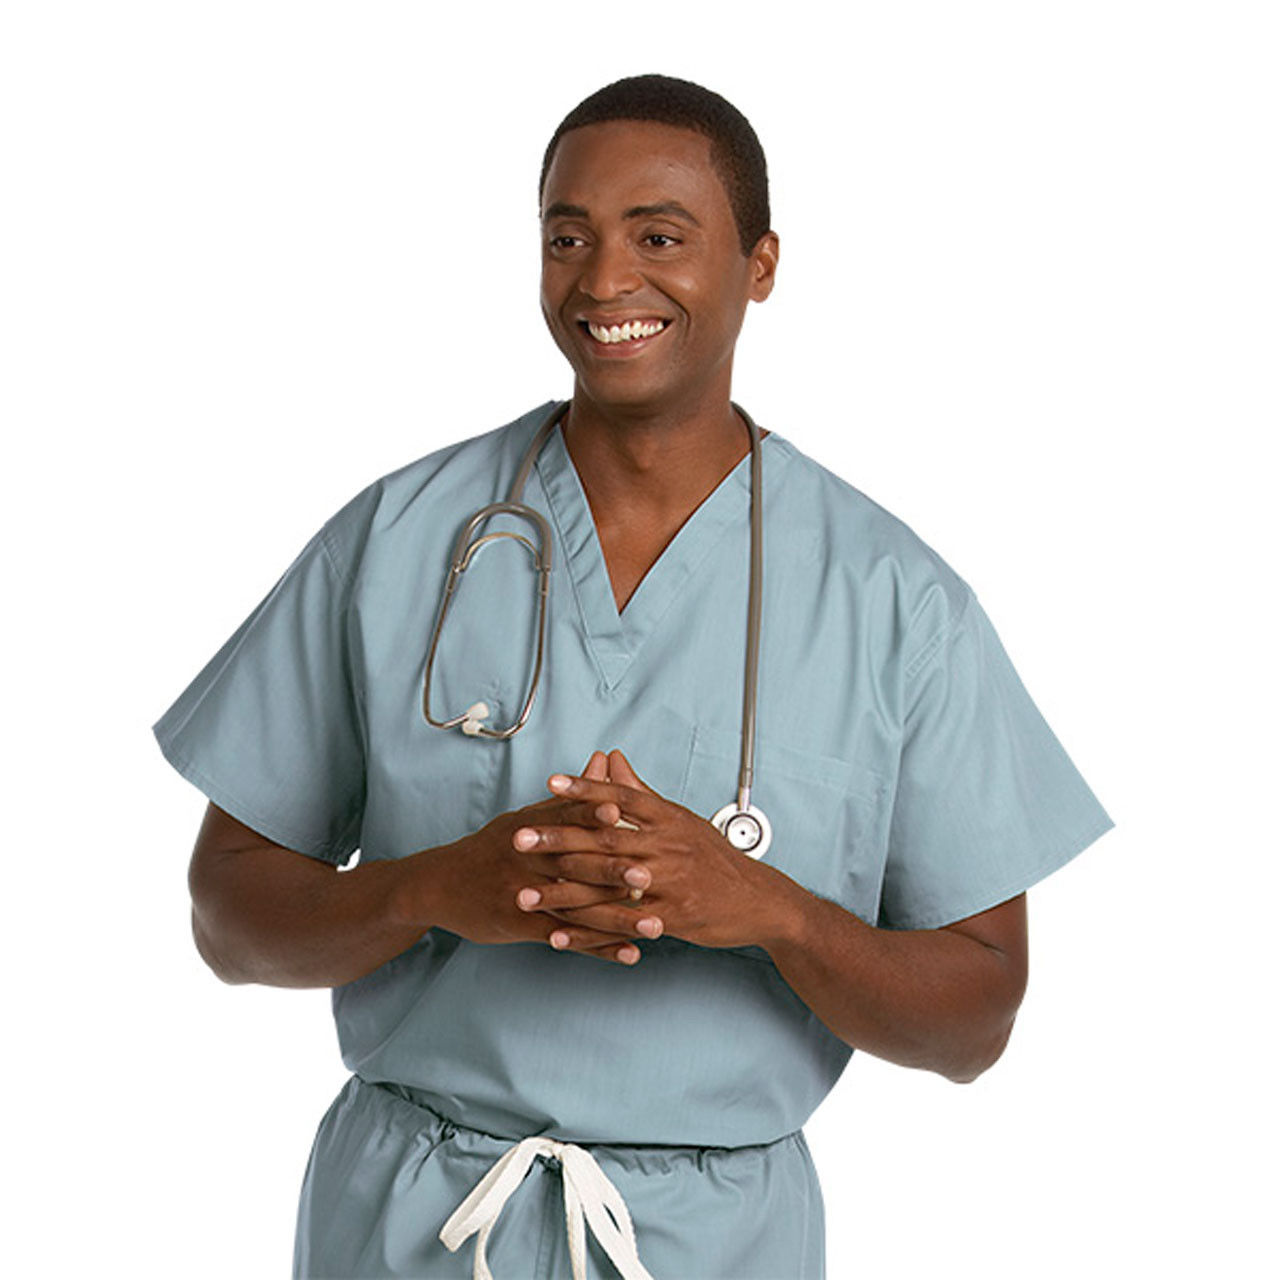 What material are the Misty Reversible V-Neck surgical scrubs made from?